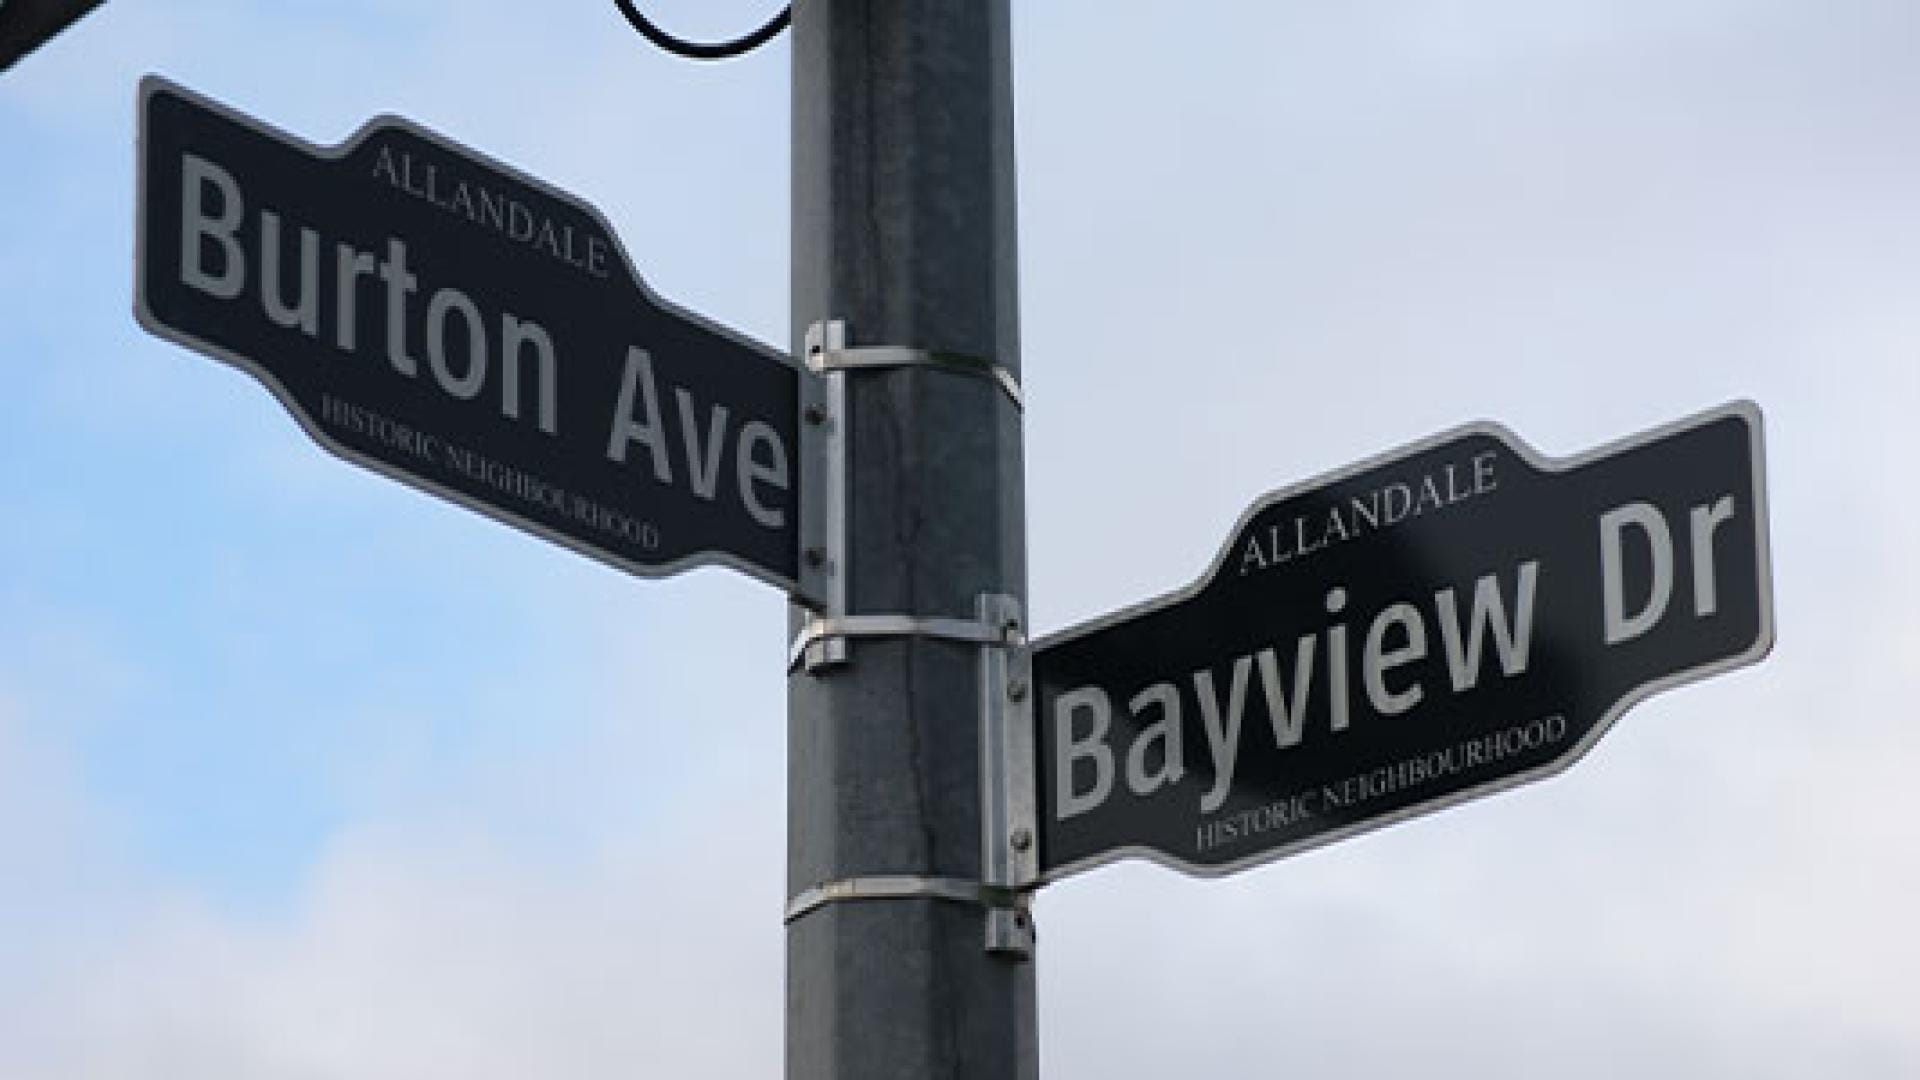 Street signs: Burton Ave and Bayview Dr